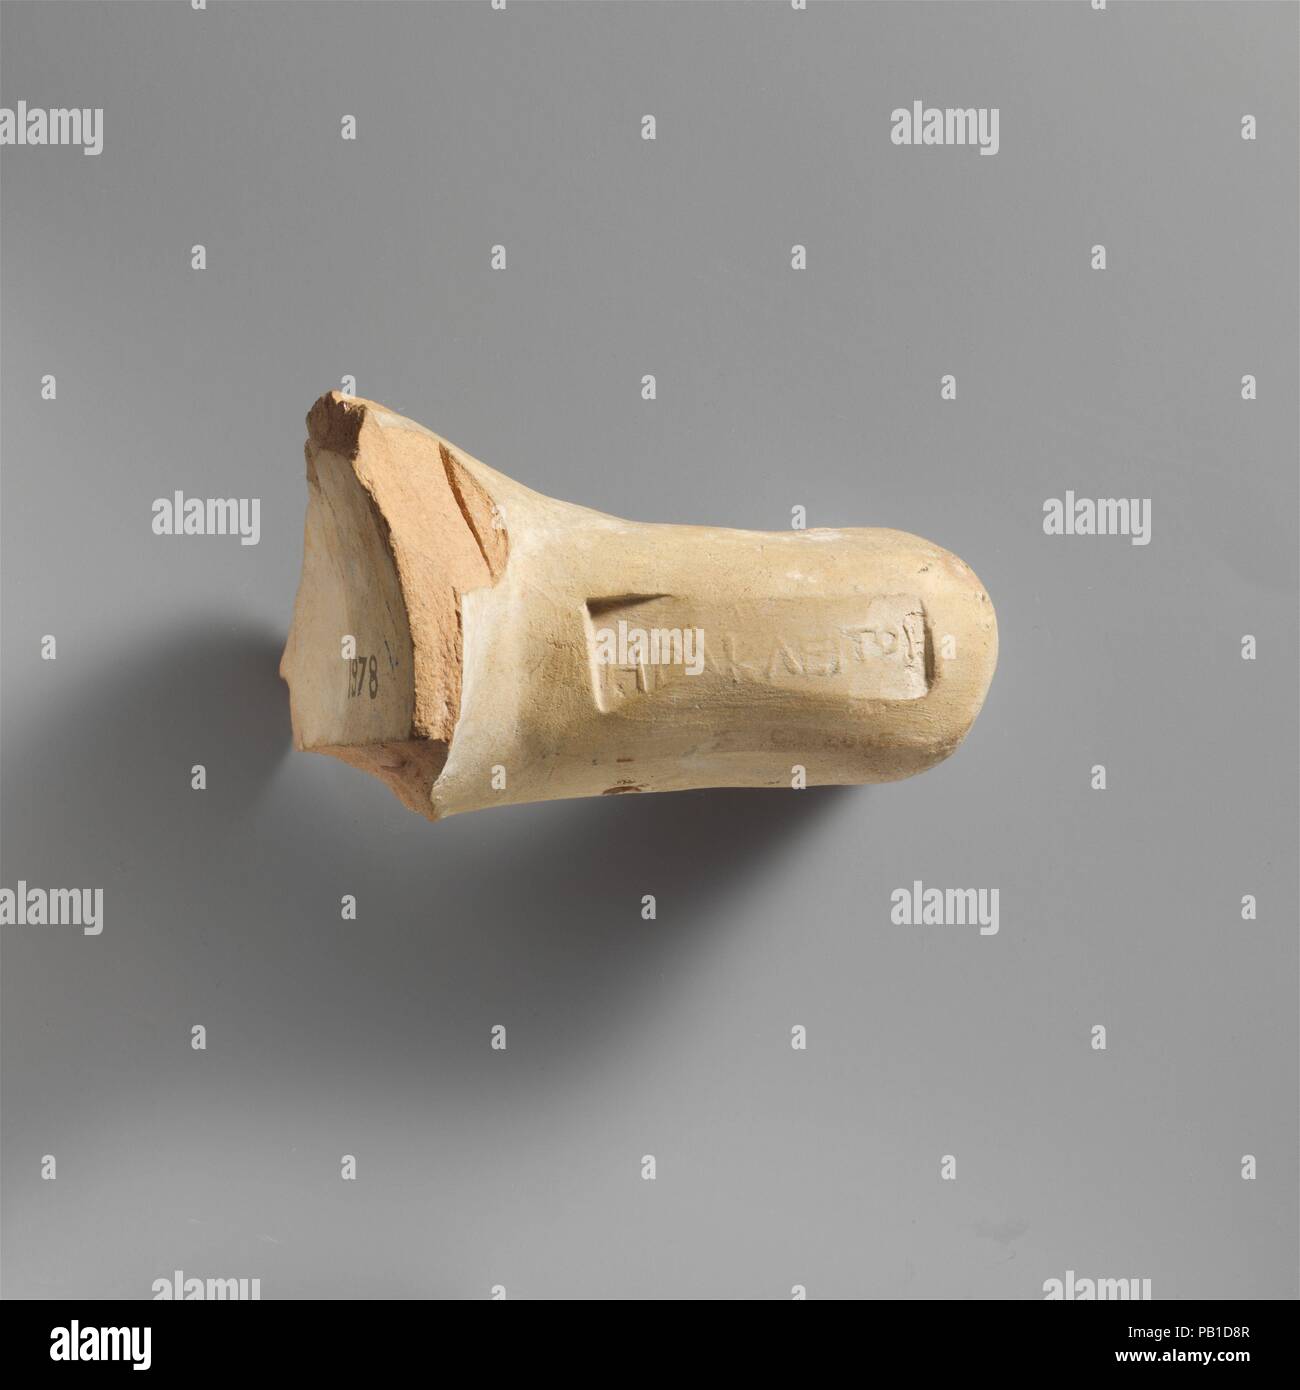 Terracotta amphora handle with stamp. Culture: Greek, Rhodian. Dimensions: Other: 4 in. (10.2 cm). Date: ca. 220-180 B.C..  The stamp bears the name of the potter Herakleitos. Museum: Metropolitan Museum of Art, New York, USA. Stock Photo